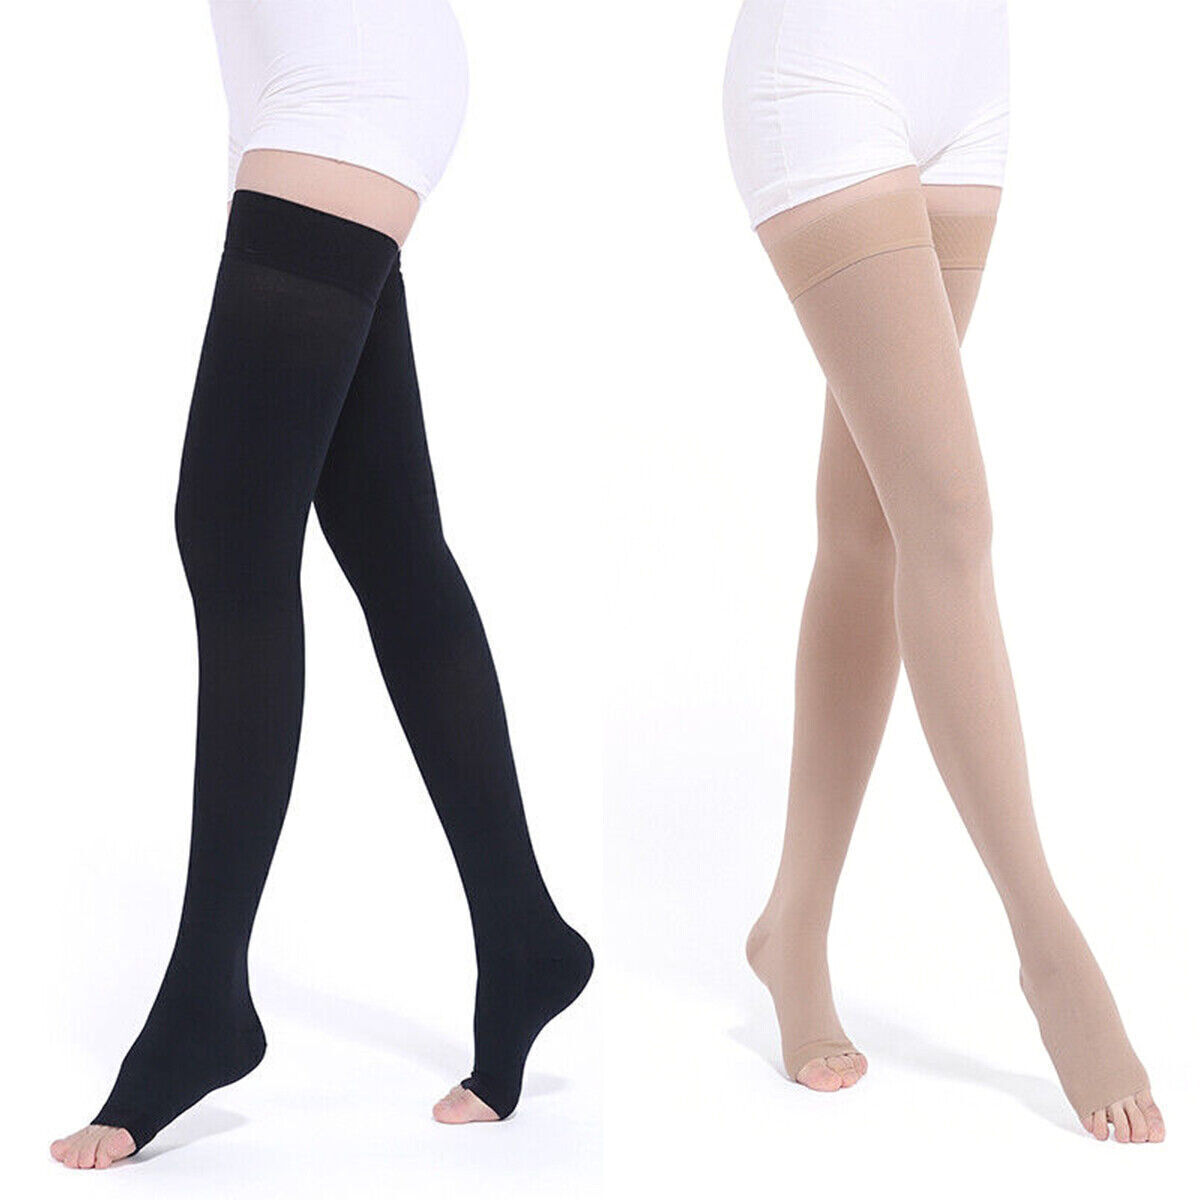 Medical Compression Stockings Support Varicose Veins Thigh High Open Toe  Unisex - Tony's Restaurant in Alton, IL